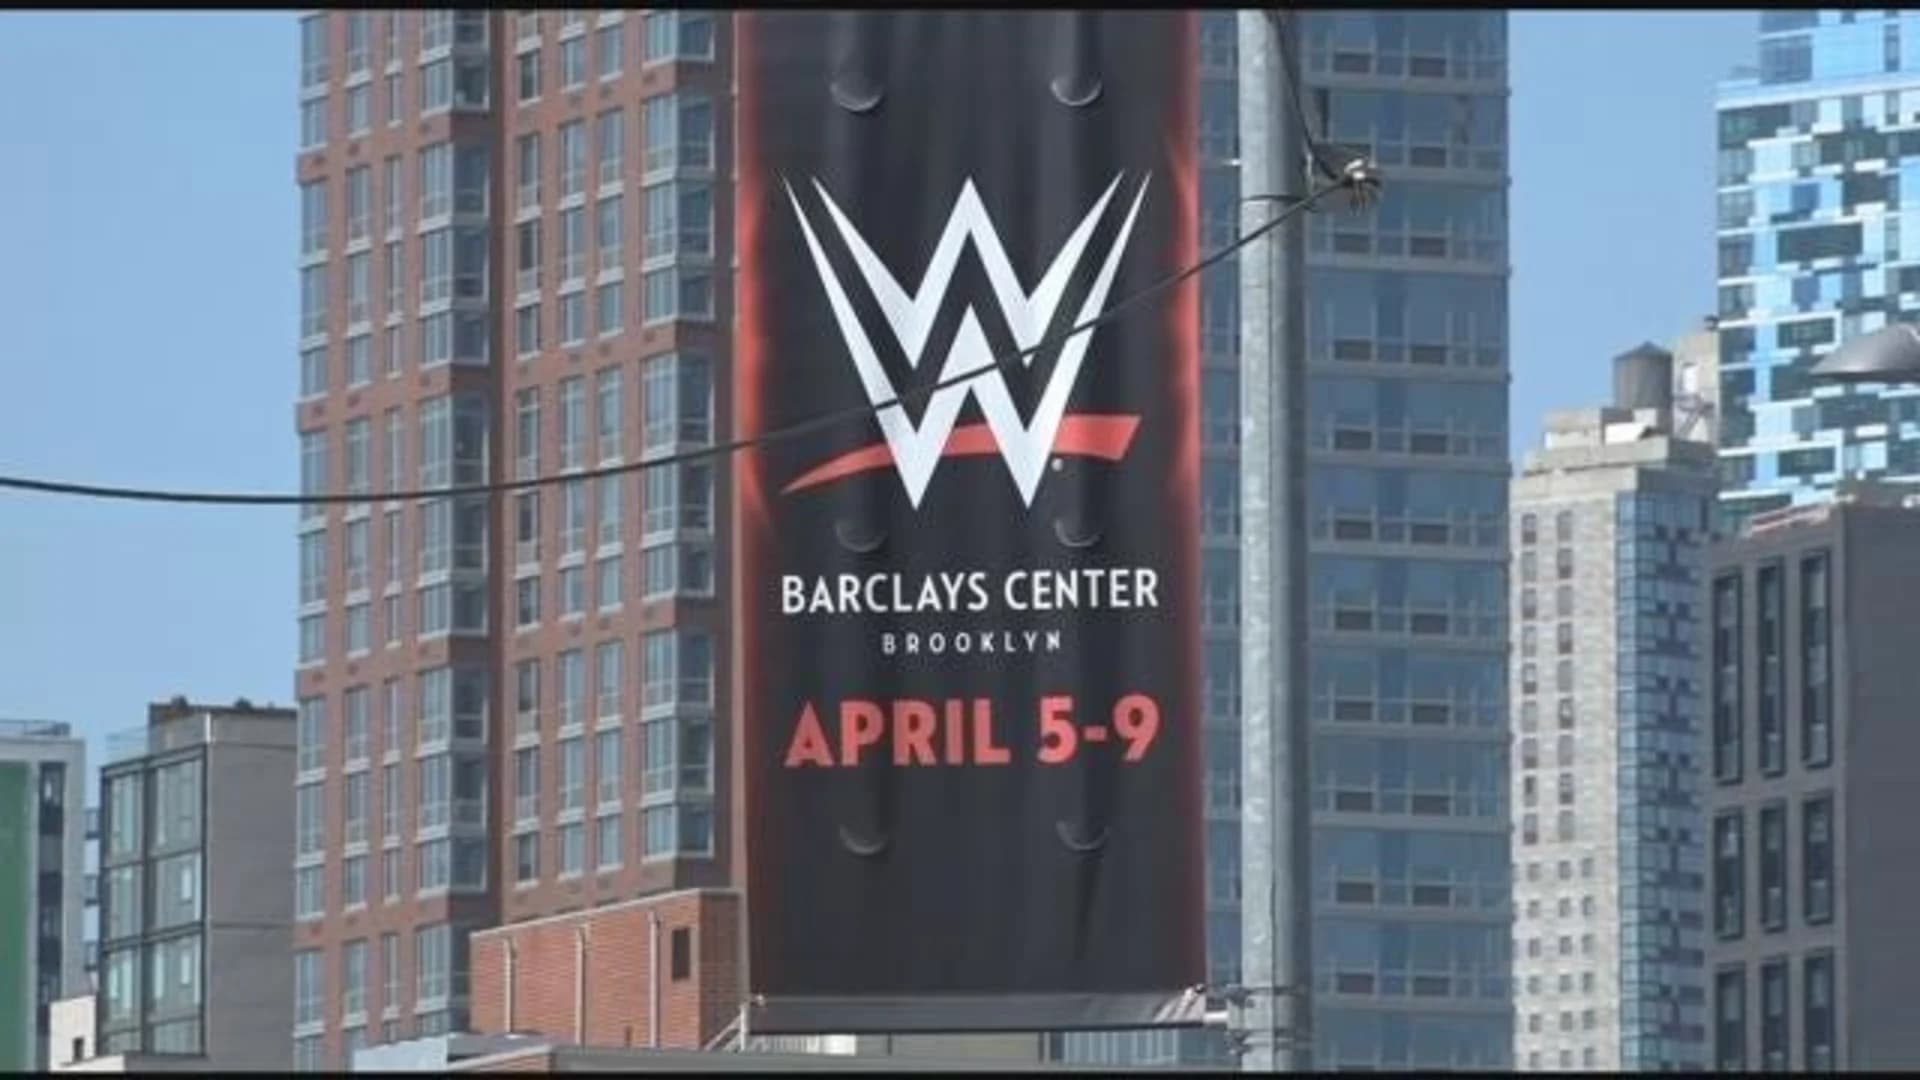 Downtown Brooklyn expects economic boost ahead of WWE WrestleMania 35